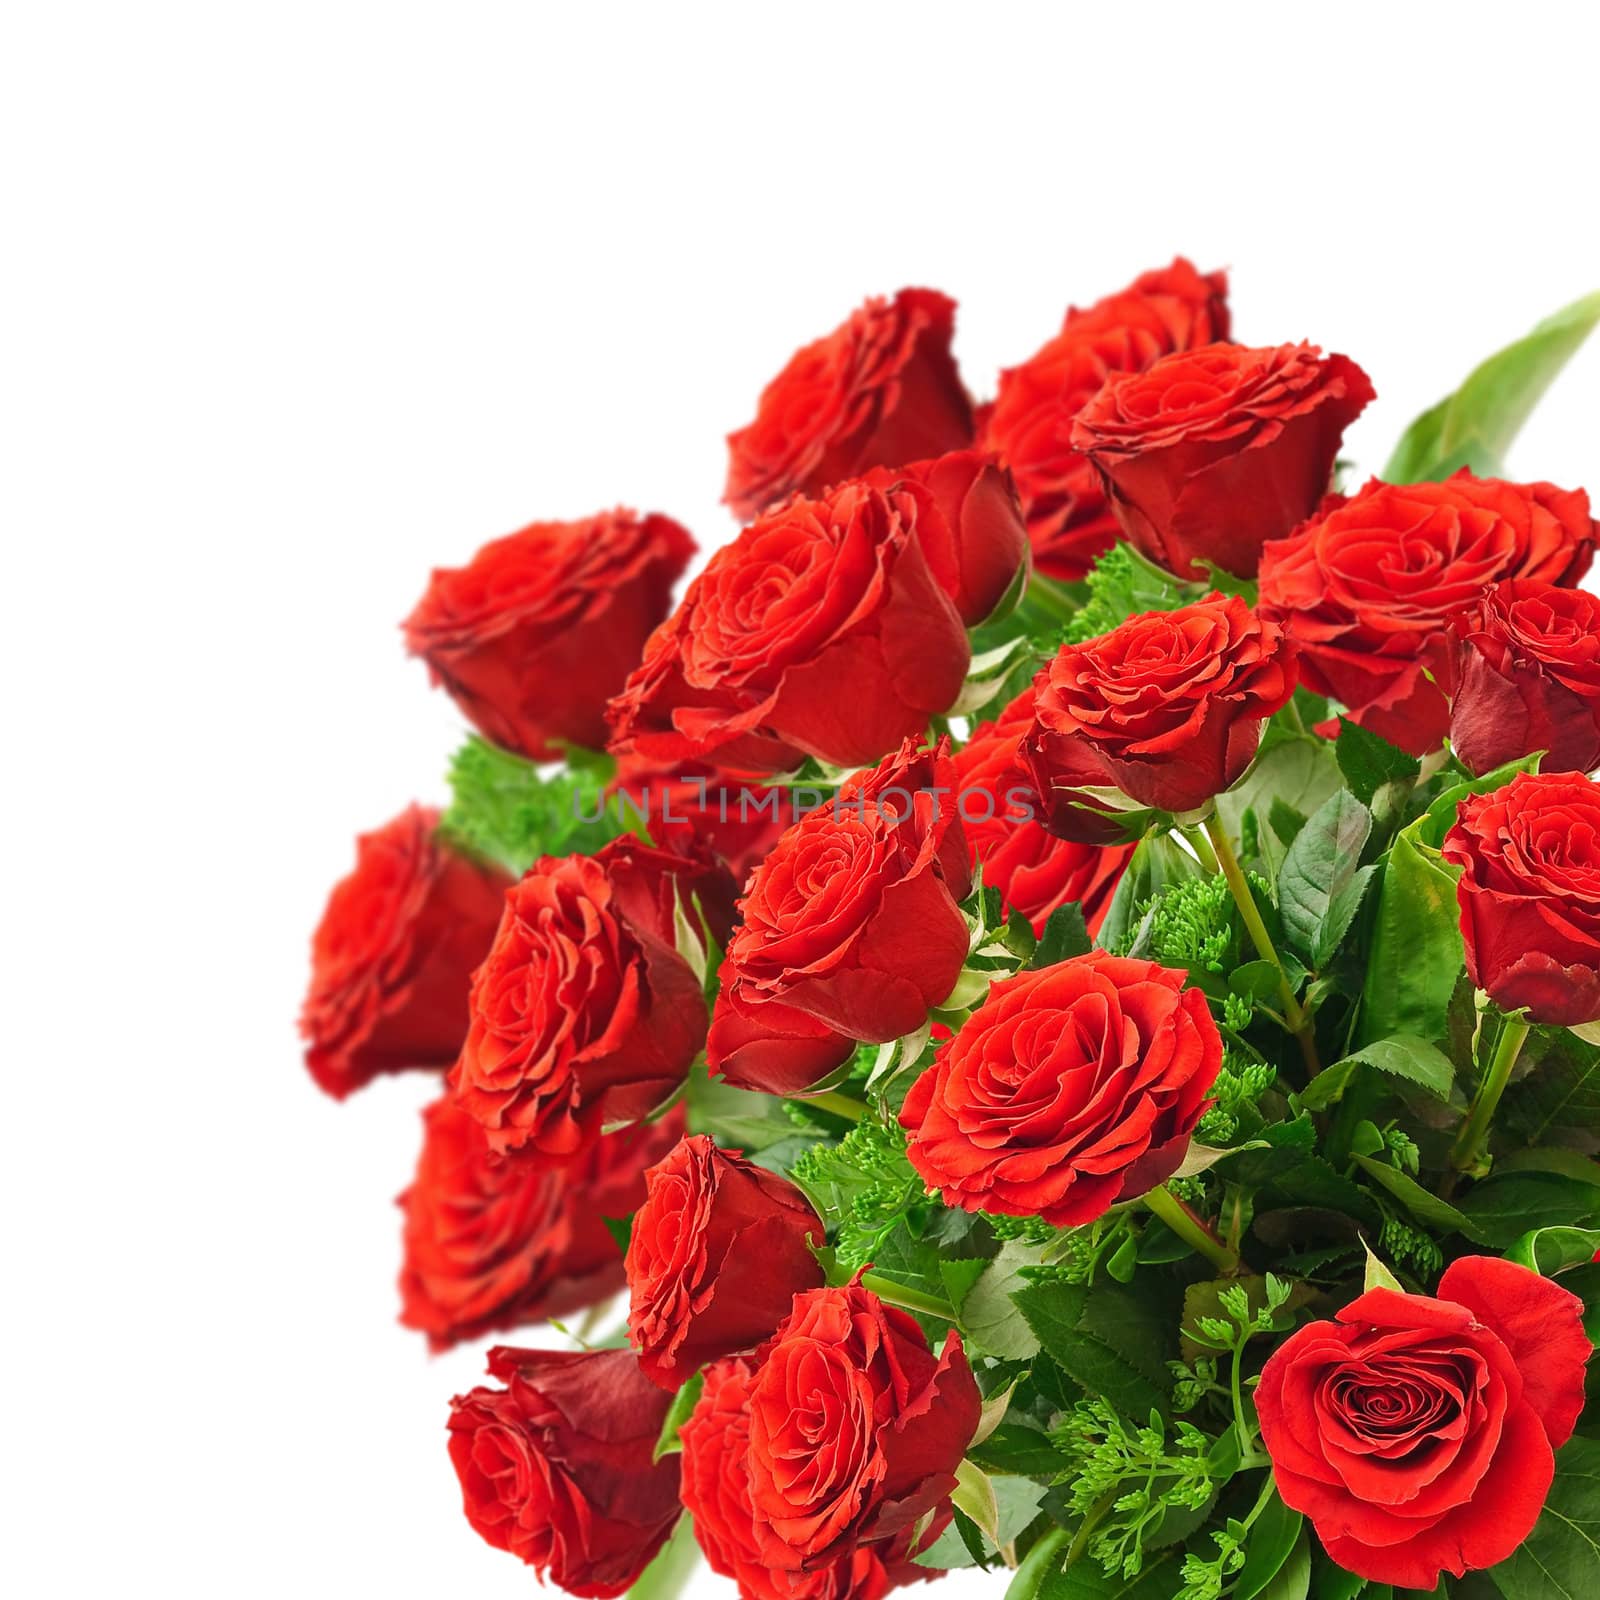 bouquet of red roses over white background